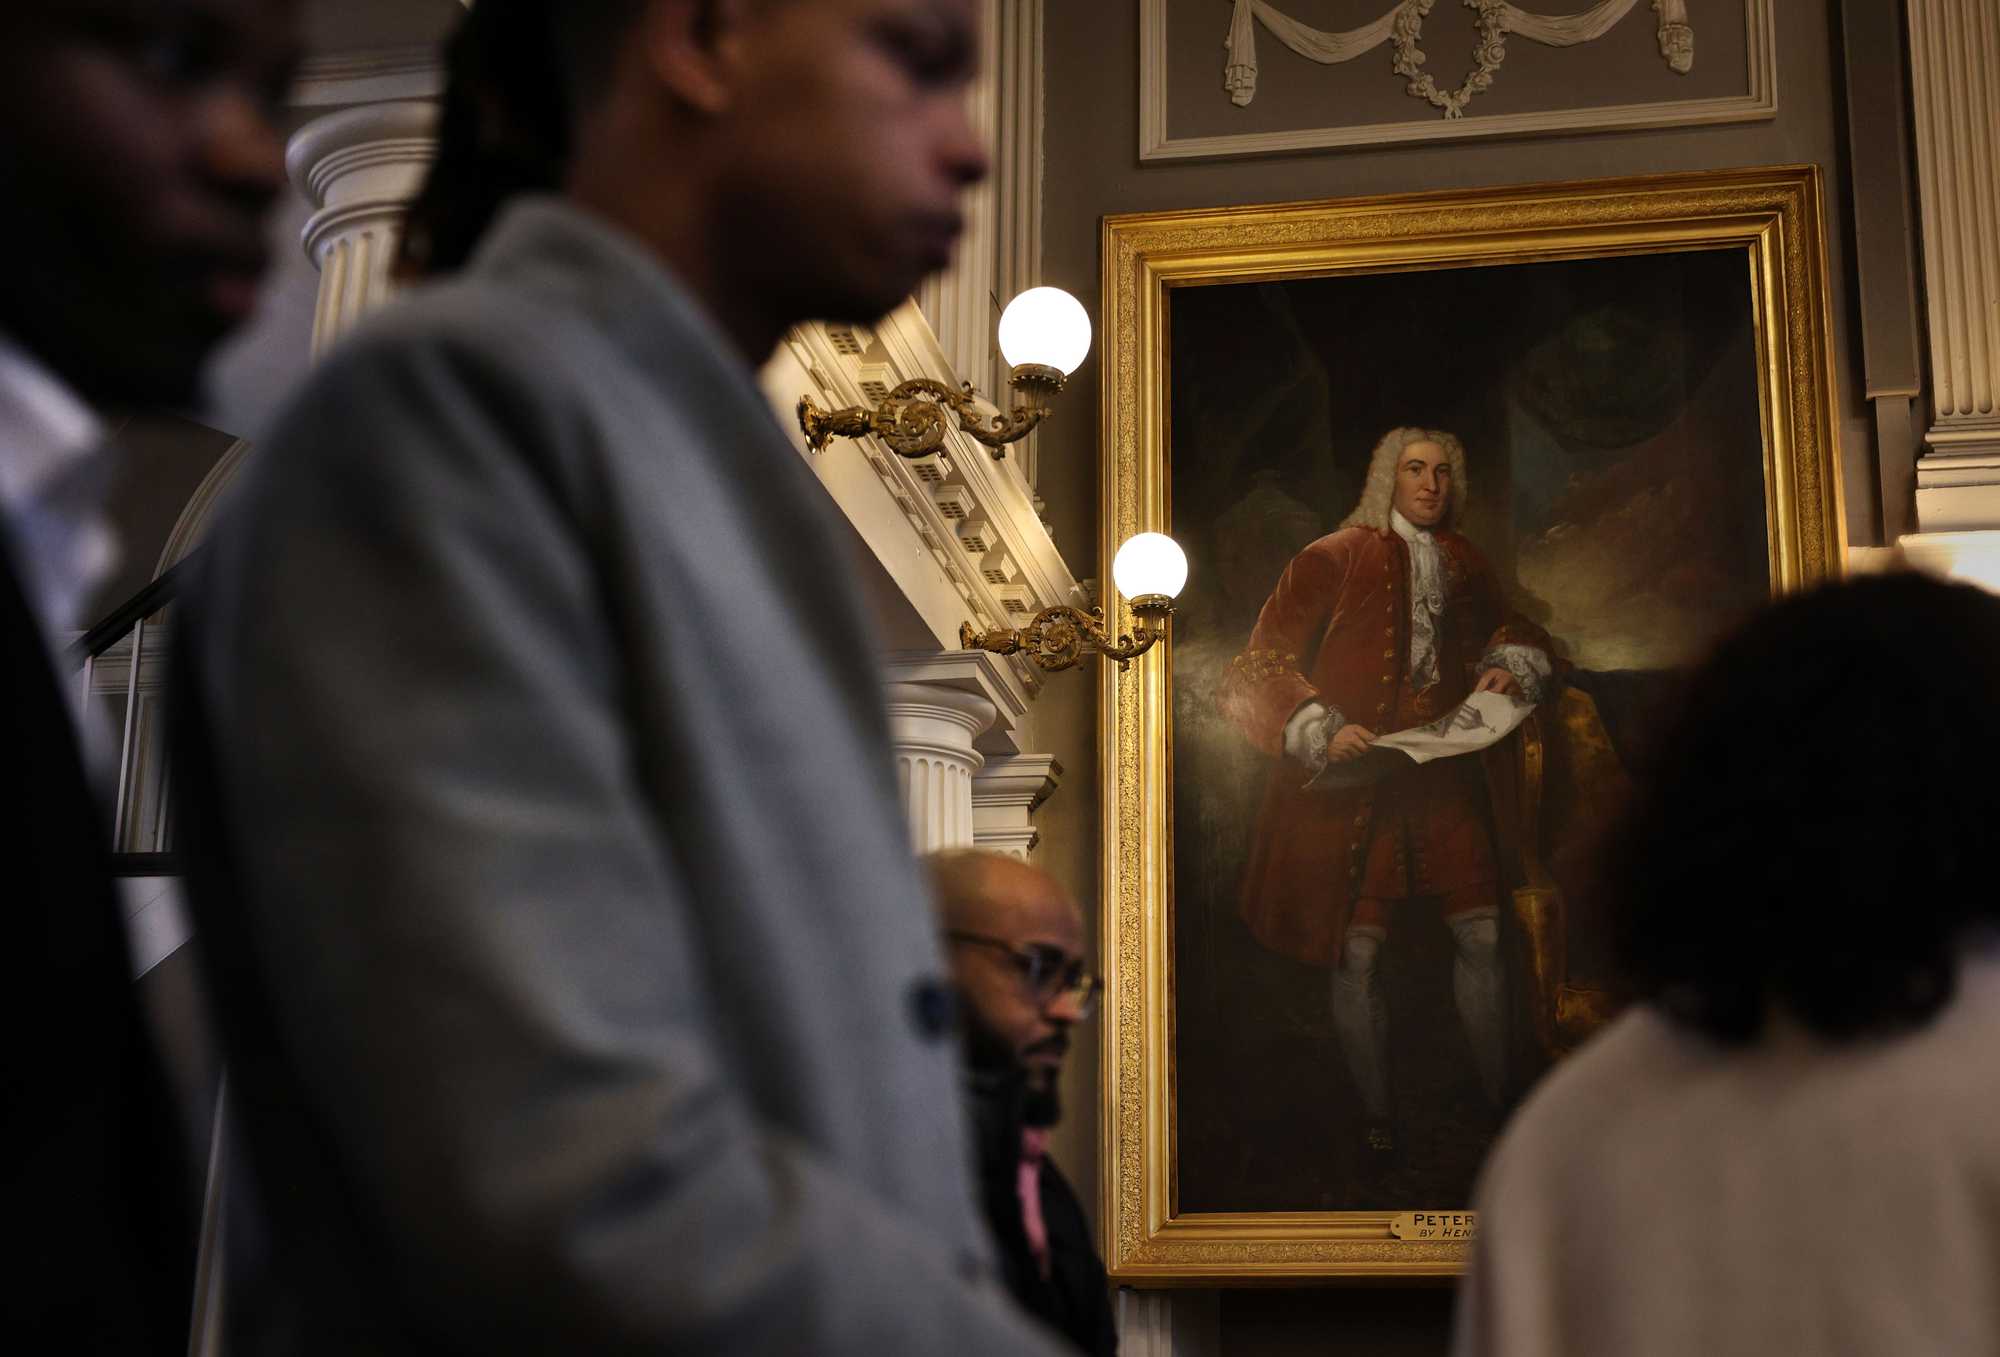 A portrait of Peter Faneuil hangs in the Great Hall during a naturalization ceremony at Faneuil Hall.